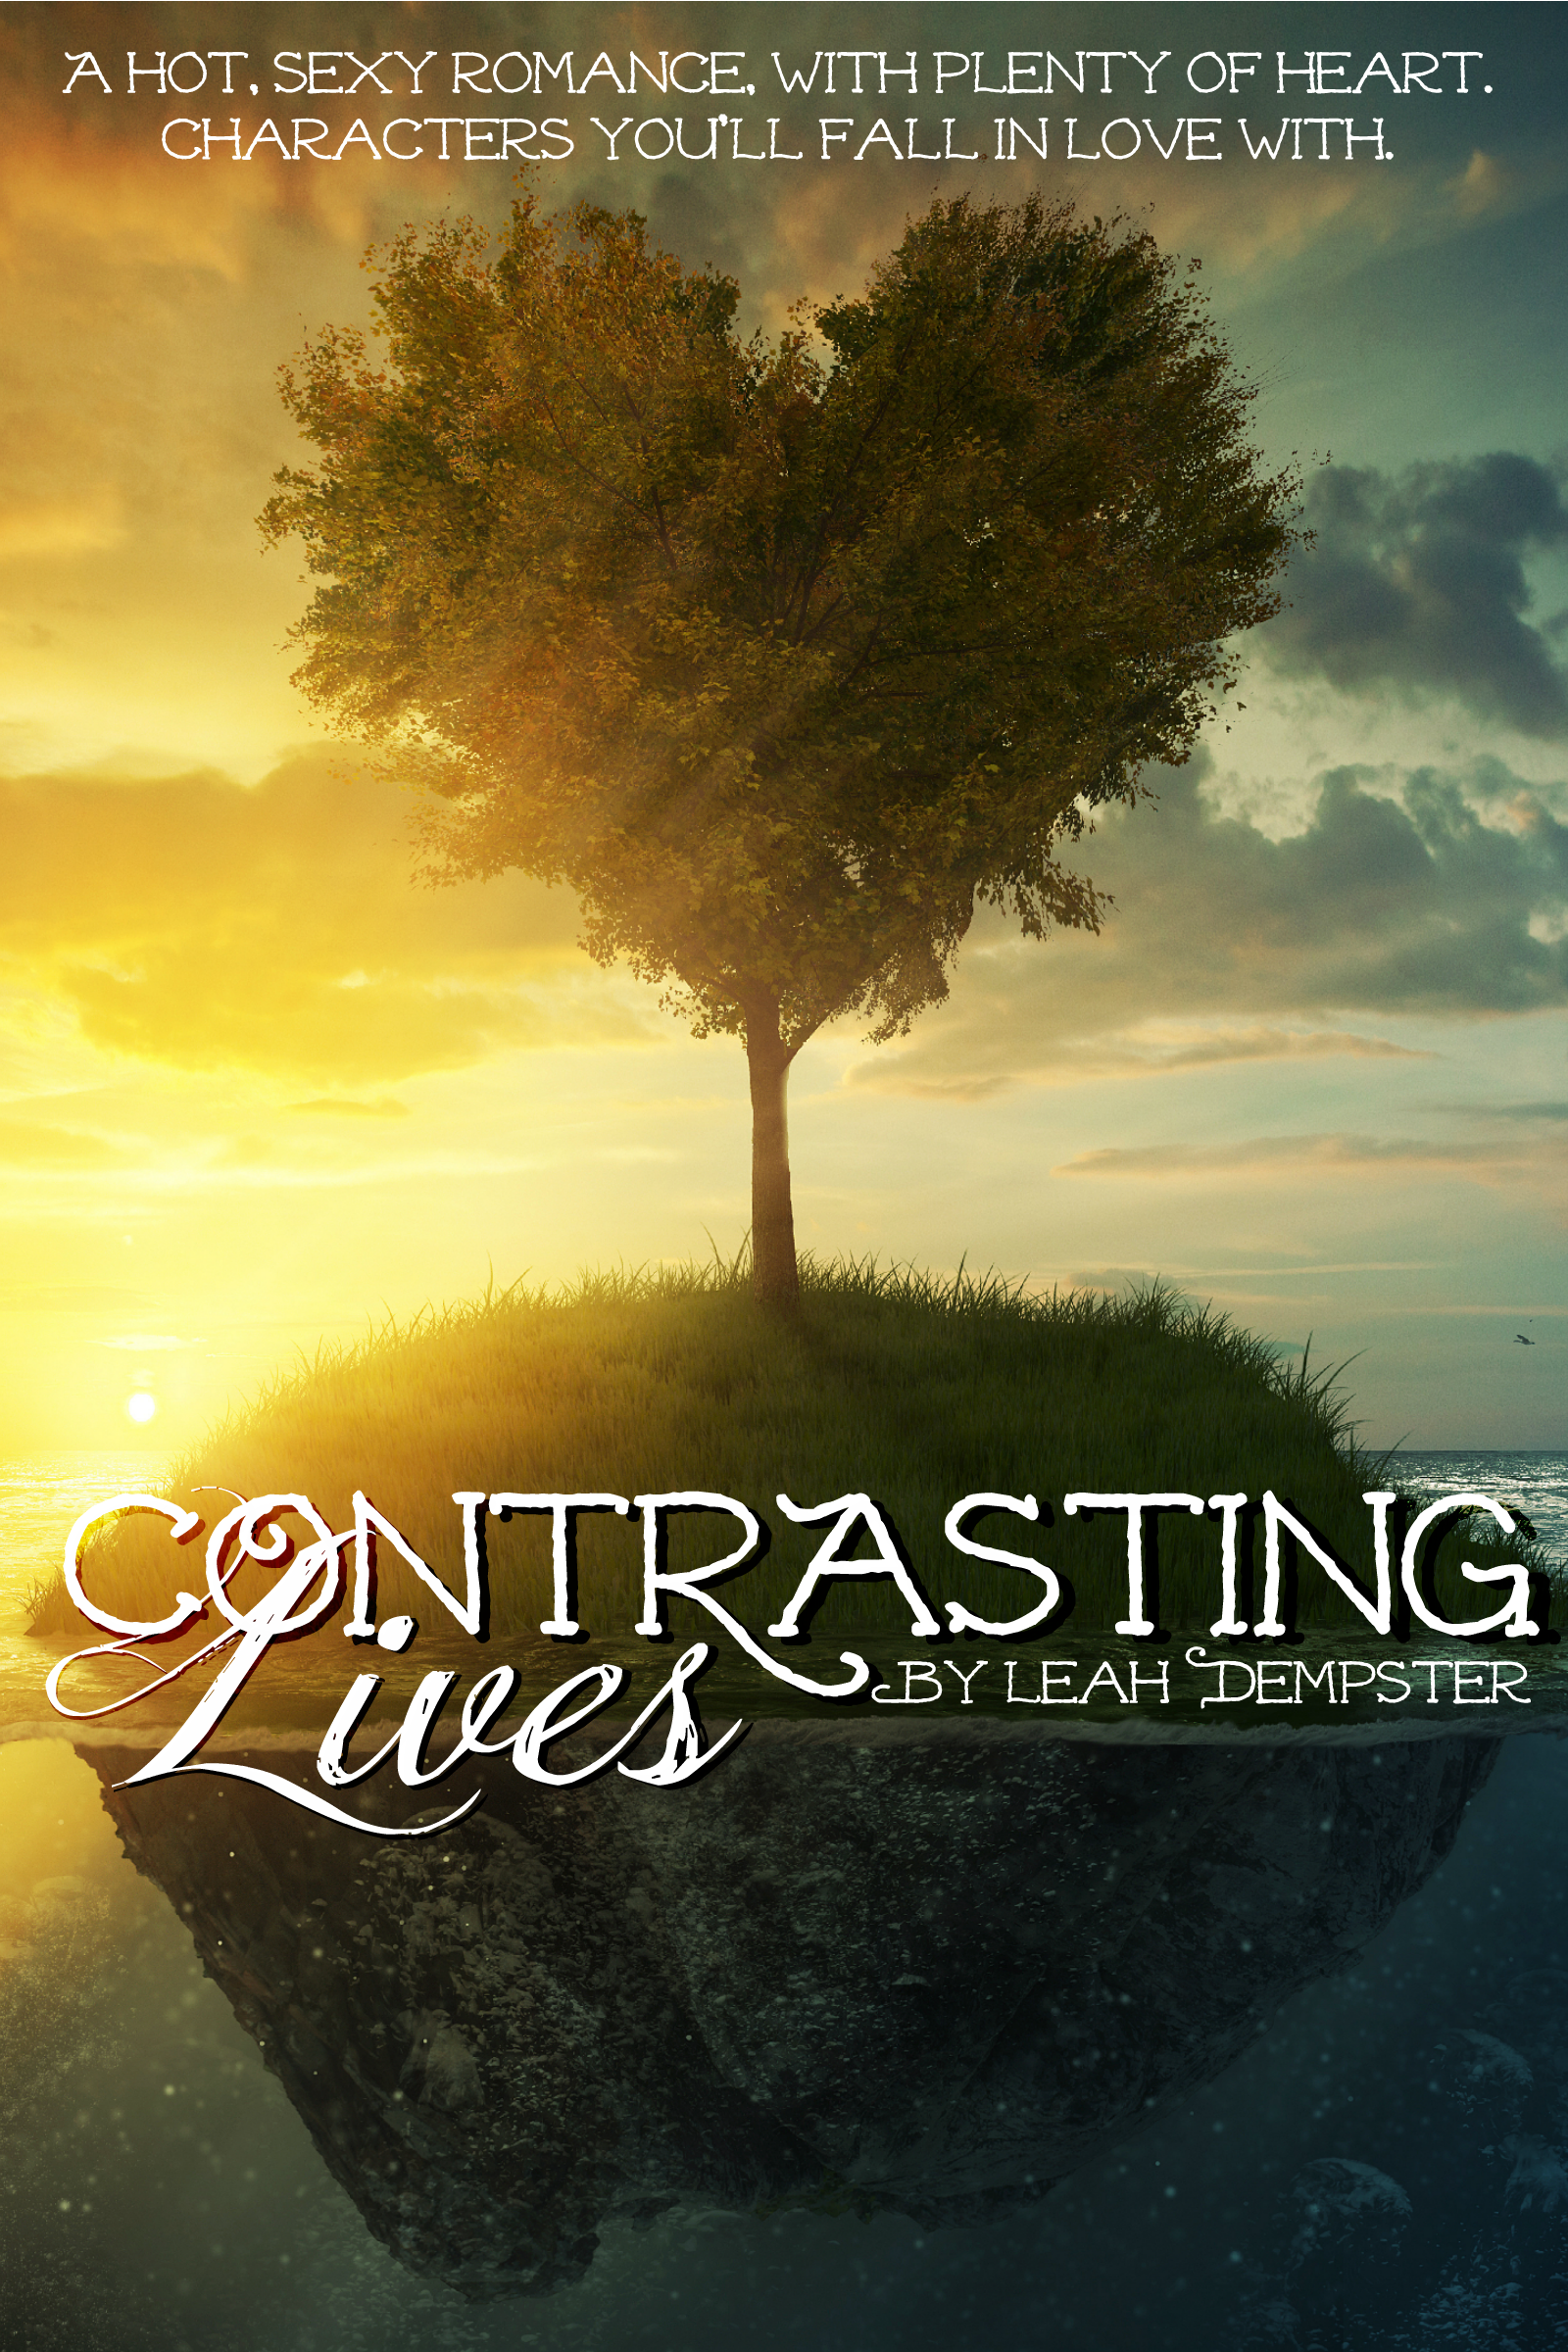 FREE: Contrasting Lives by Leah Dempster